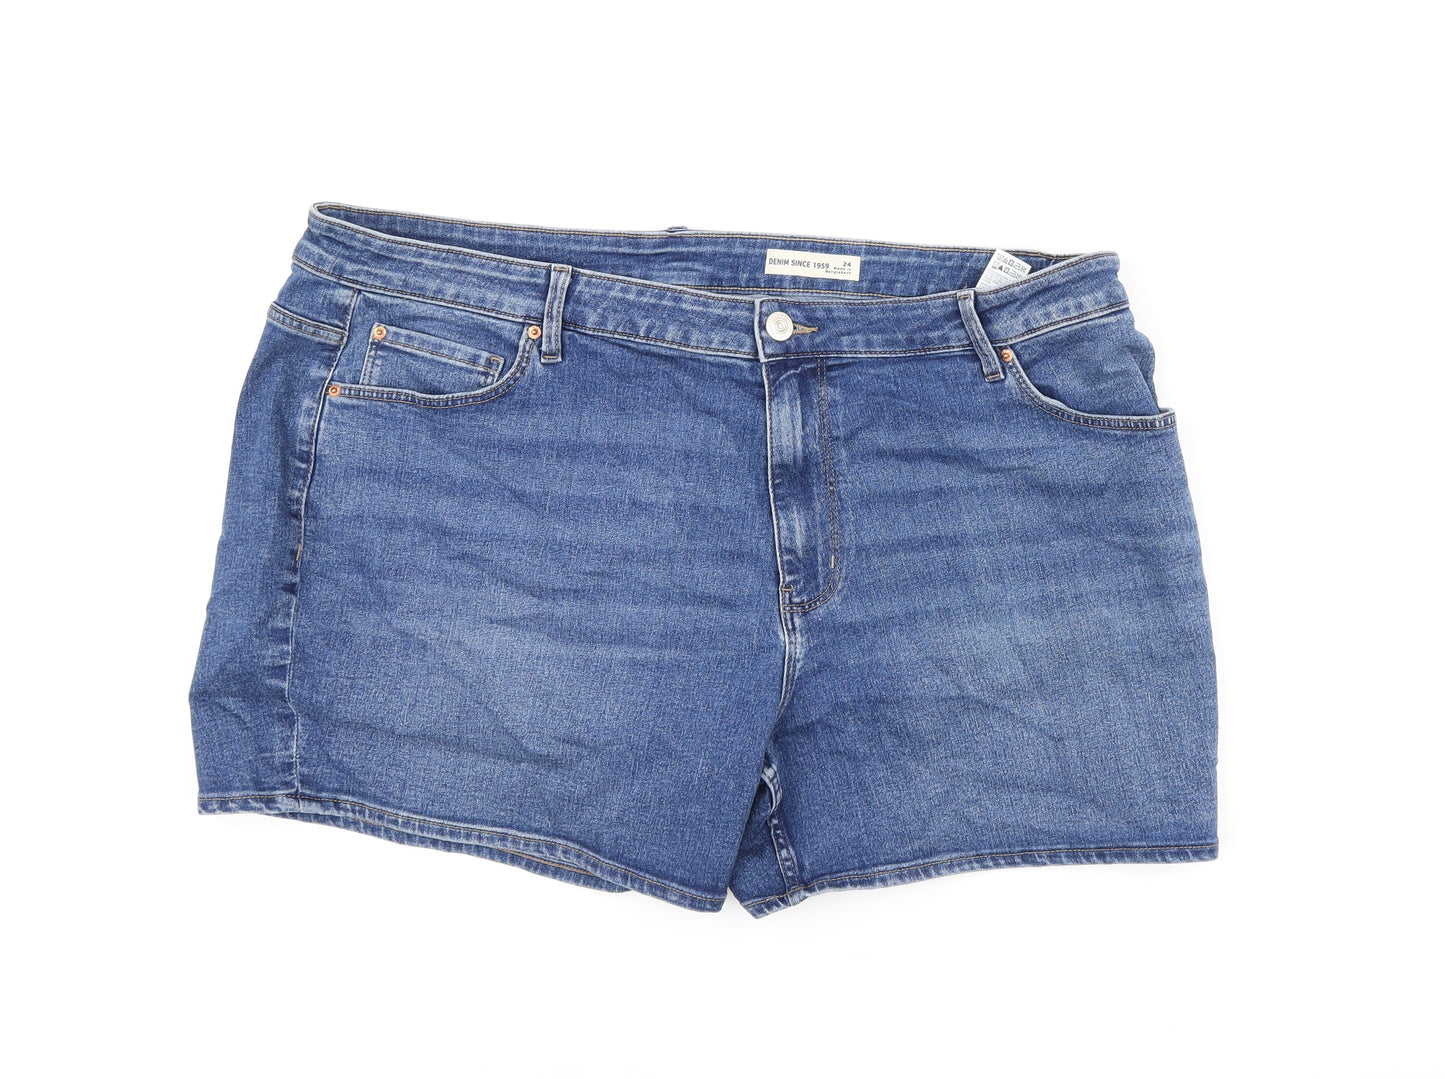 Marks and Spencer Womens Blue Cotton Hot Pants Shorts Size 24 L5.5 in Regular Zip